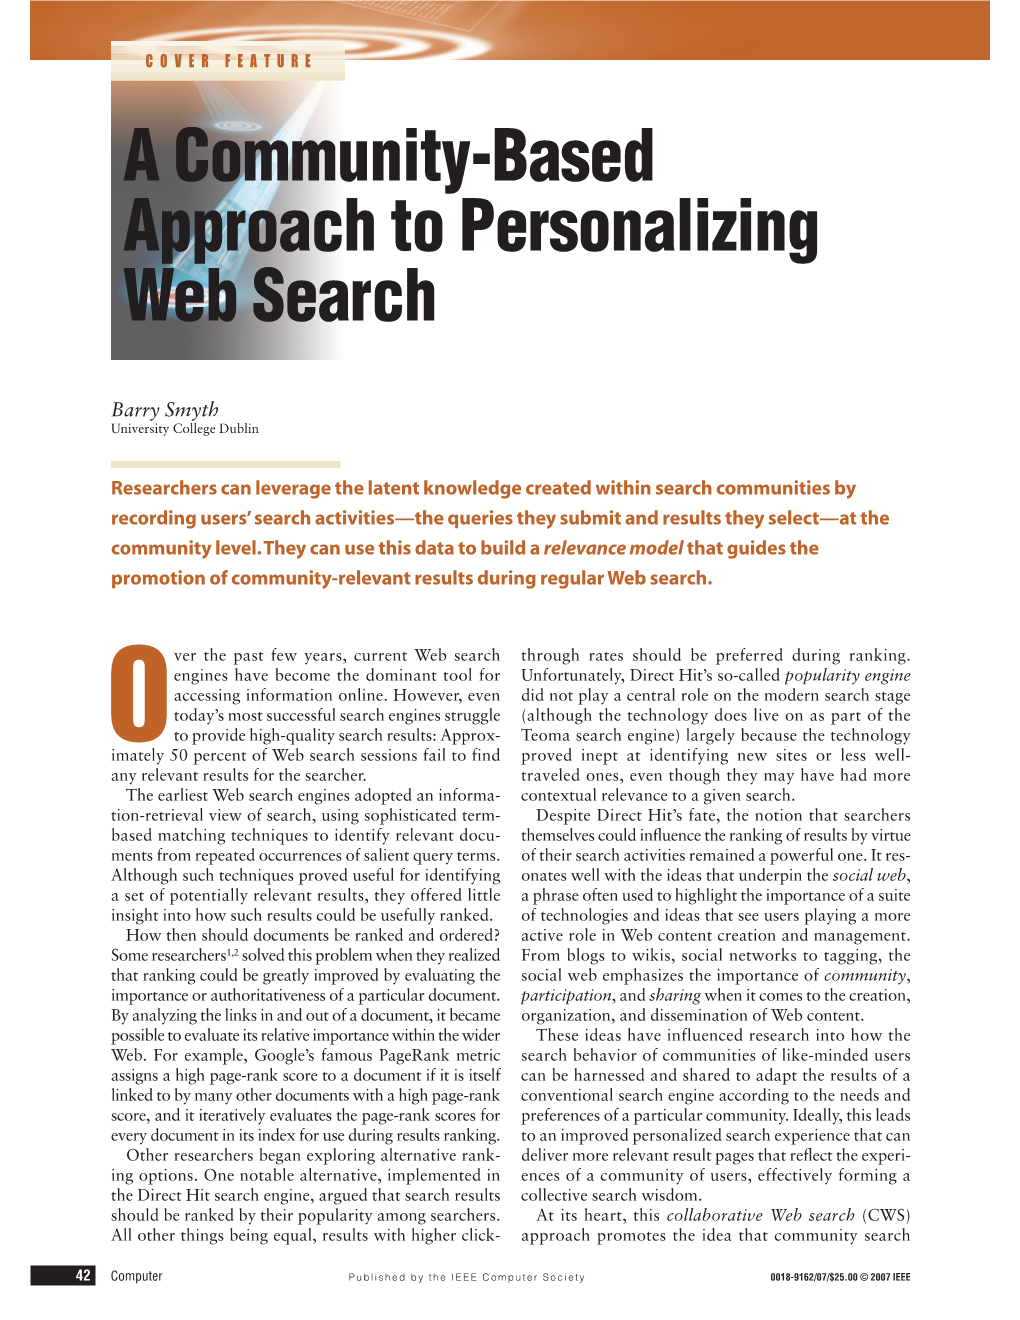 A Community-Based Approach to Personalizing Web Search